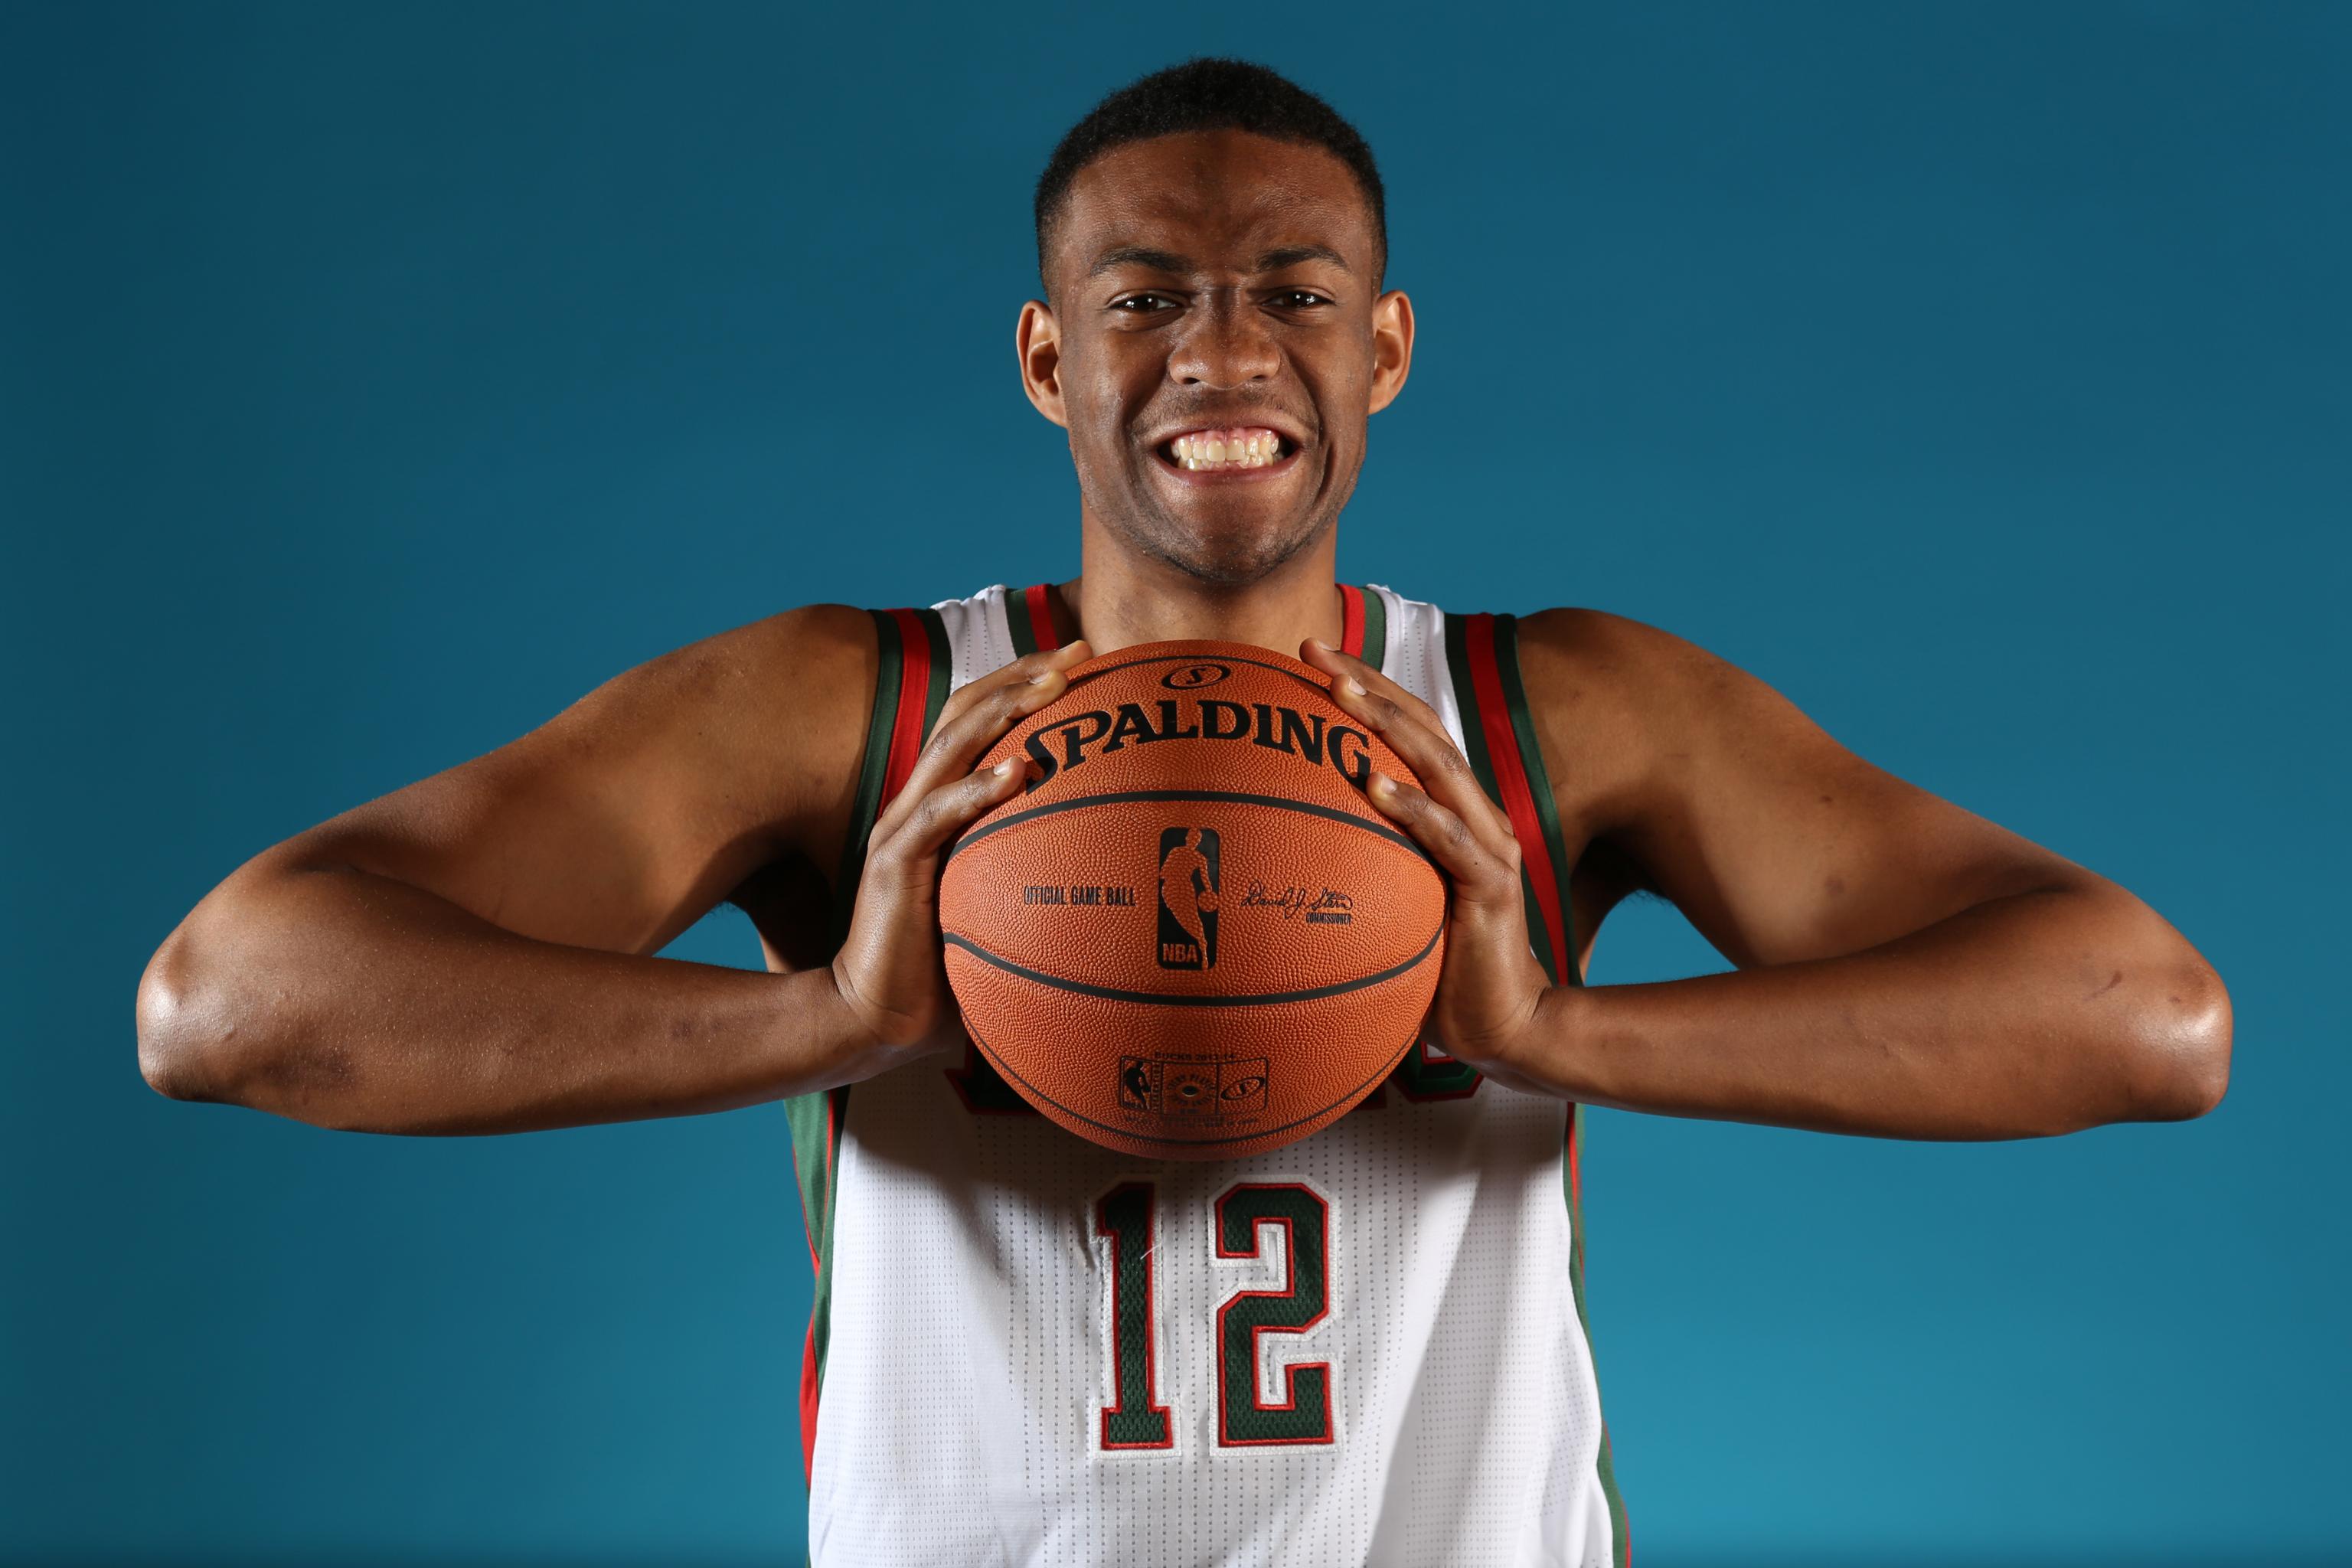 NBA Draft: Who goes first, Wiggins or Parker? - The Washington Post